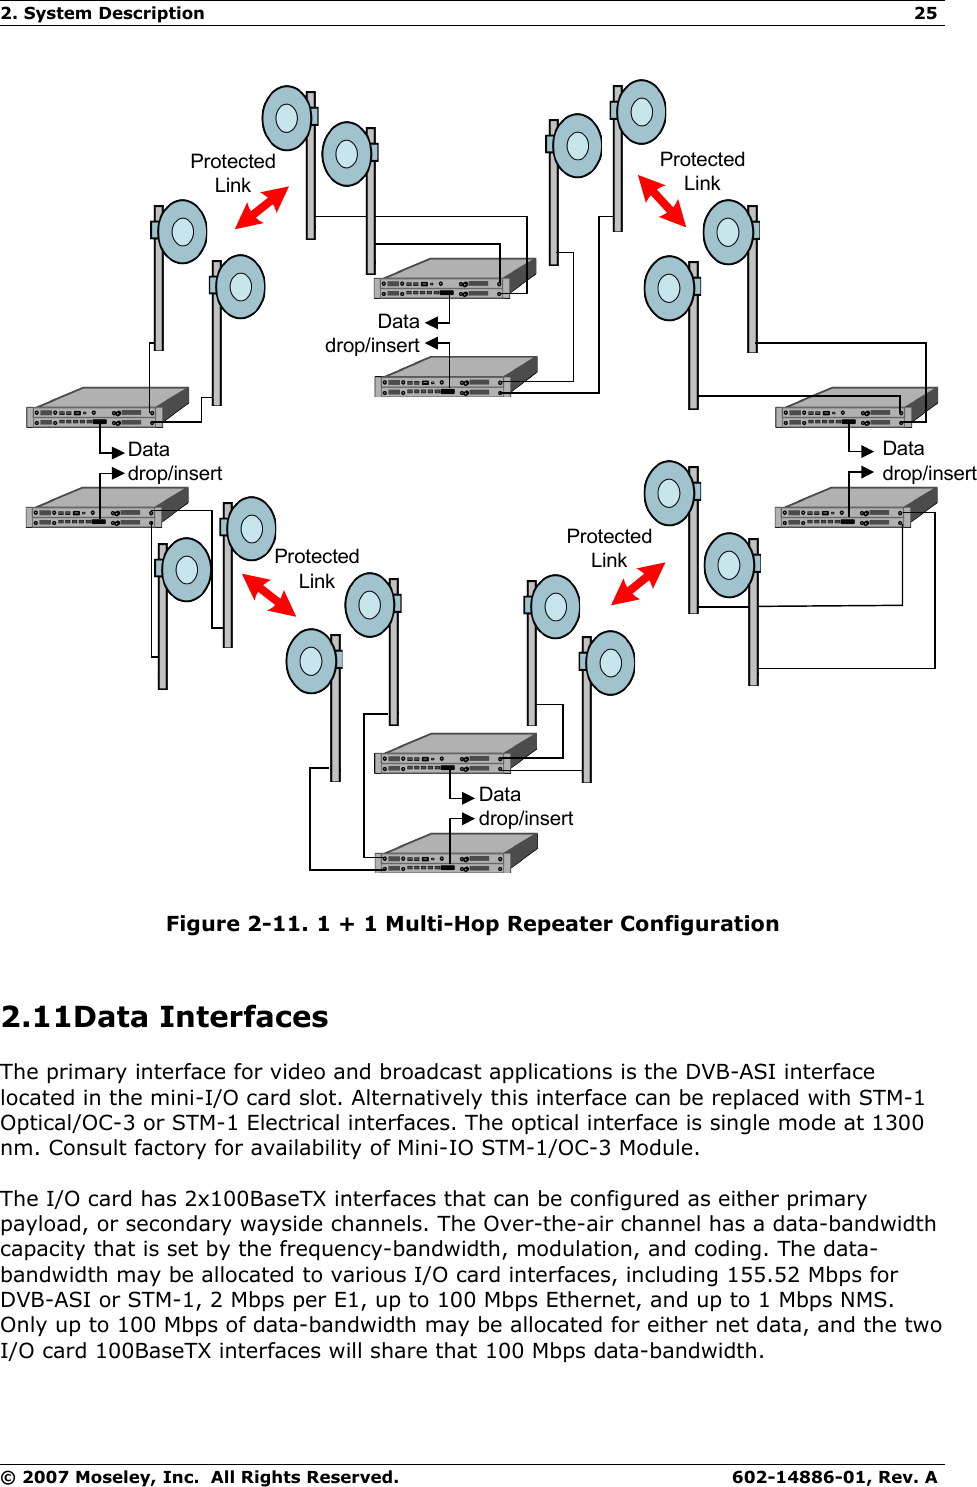 2. System Description 25Datadrop/insertDatadrop/insertDatadrop/insertDatadrop/insertProtectedLinkProtectedLinkProtectedLinkProtectedLinkFigure 2-11. 1 + 1 Multi-Hop Repeater Configuration2.11Data InterfacesThe primary interface for video and broadcast applications is the DVB-ASI interface located in the mini-I/O card slot. Alternatively this interface can be replaced with STM-1 Optical/OC-3 or STM-1 Electrical interfaces. The optical interface is single mode at 1300 nm. Consult factory for availability of Mini-IO STM-1/OC-3 Module.The I/O card has 2x100BaseTX interfaces that can be configured as either primary payload, or secondary wayside channels. The Over-the-air channel has a data-bandwidth capacity that is set by the frequency-bandwidth, modulation, and coding. The data-bandwidth may be allocated to various I/O card interfaces, including 155.52 Mbps for DVB-ASI or STM-1, 2 Mbps per E1, up to 100 Mbps Ethernet, and up to 1 Mbps NMS. Only up to 100 Mbps of data-bandwidth may be allocated for either net data, and the two I/O card 100BaseTX interfaces will share that 100 Mbps data-bandwidth.© 2007 Moseley, Inc.  All Rights Reserved. 602-14886-01, Rev. A